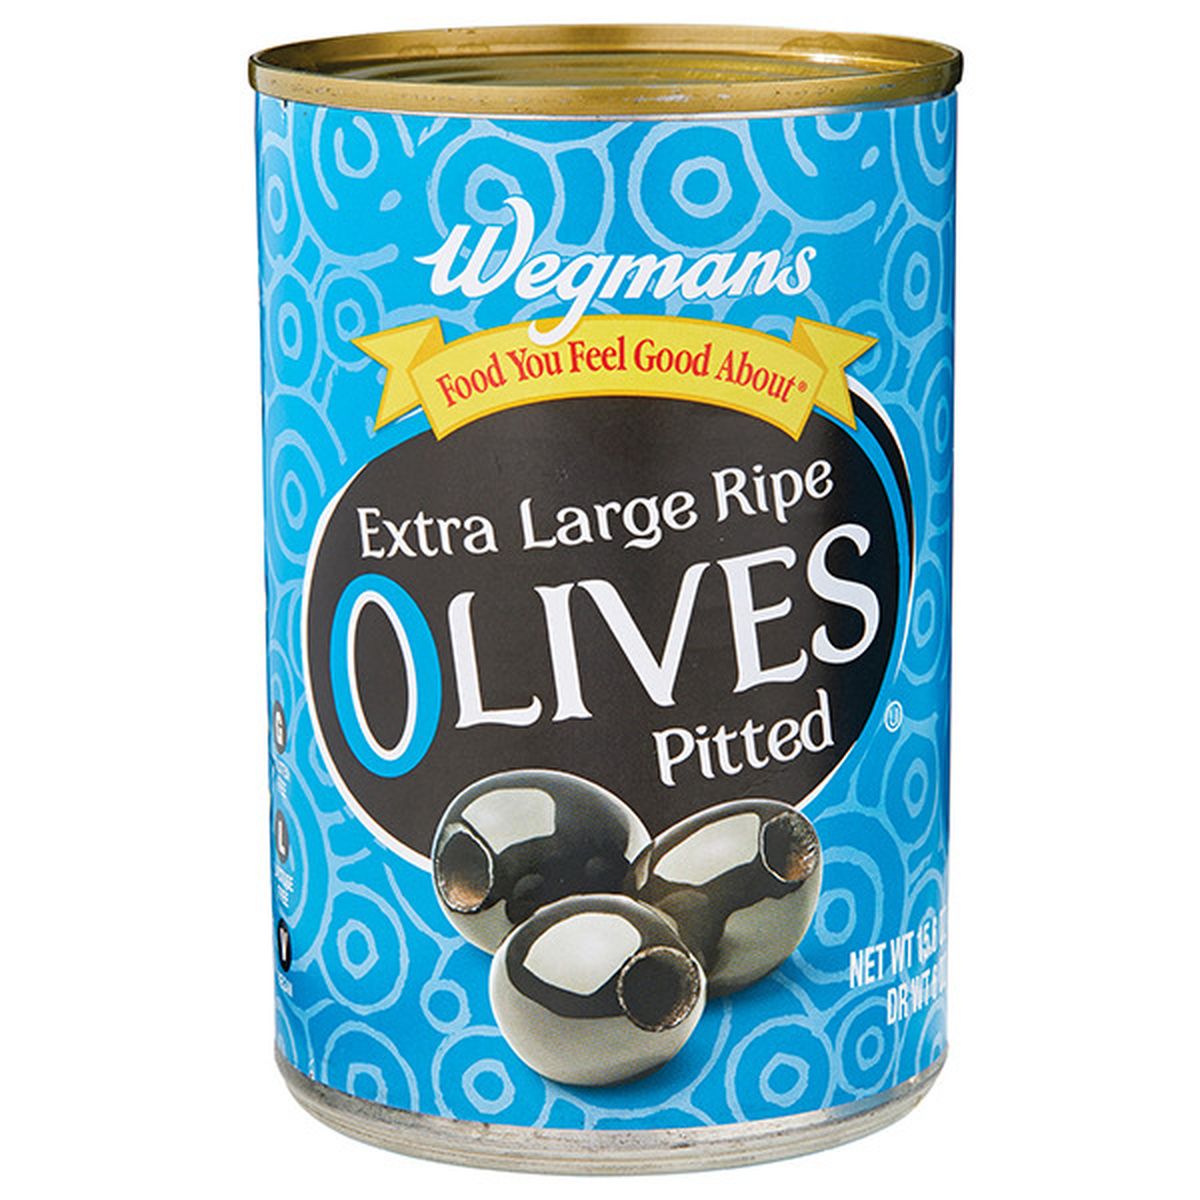 Calories in Wegmans Extra Large Ripe Pitted Black Olives